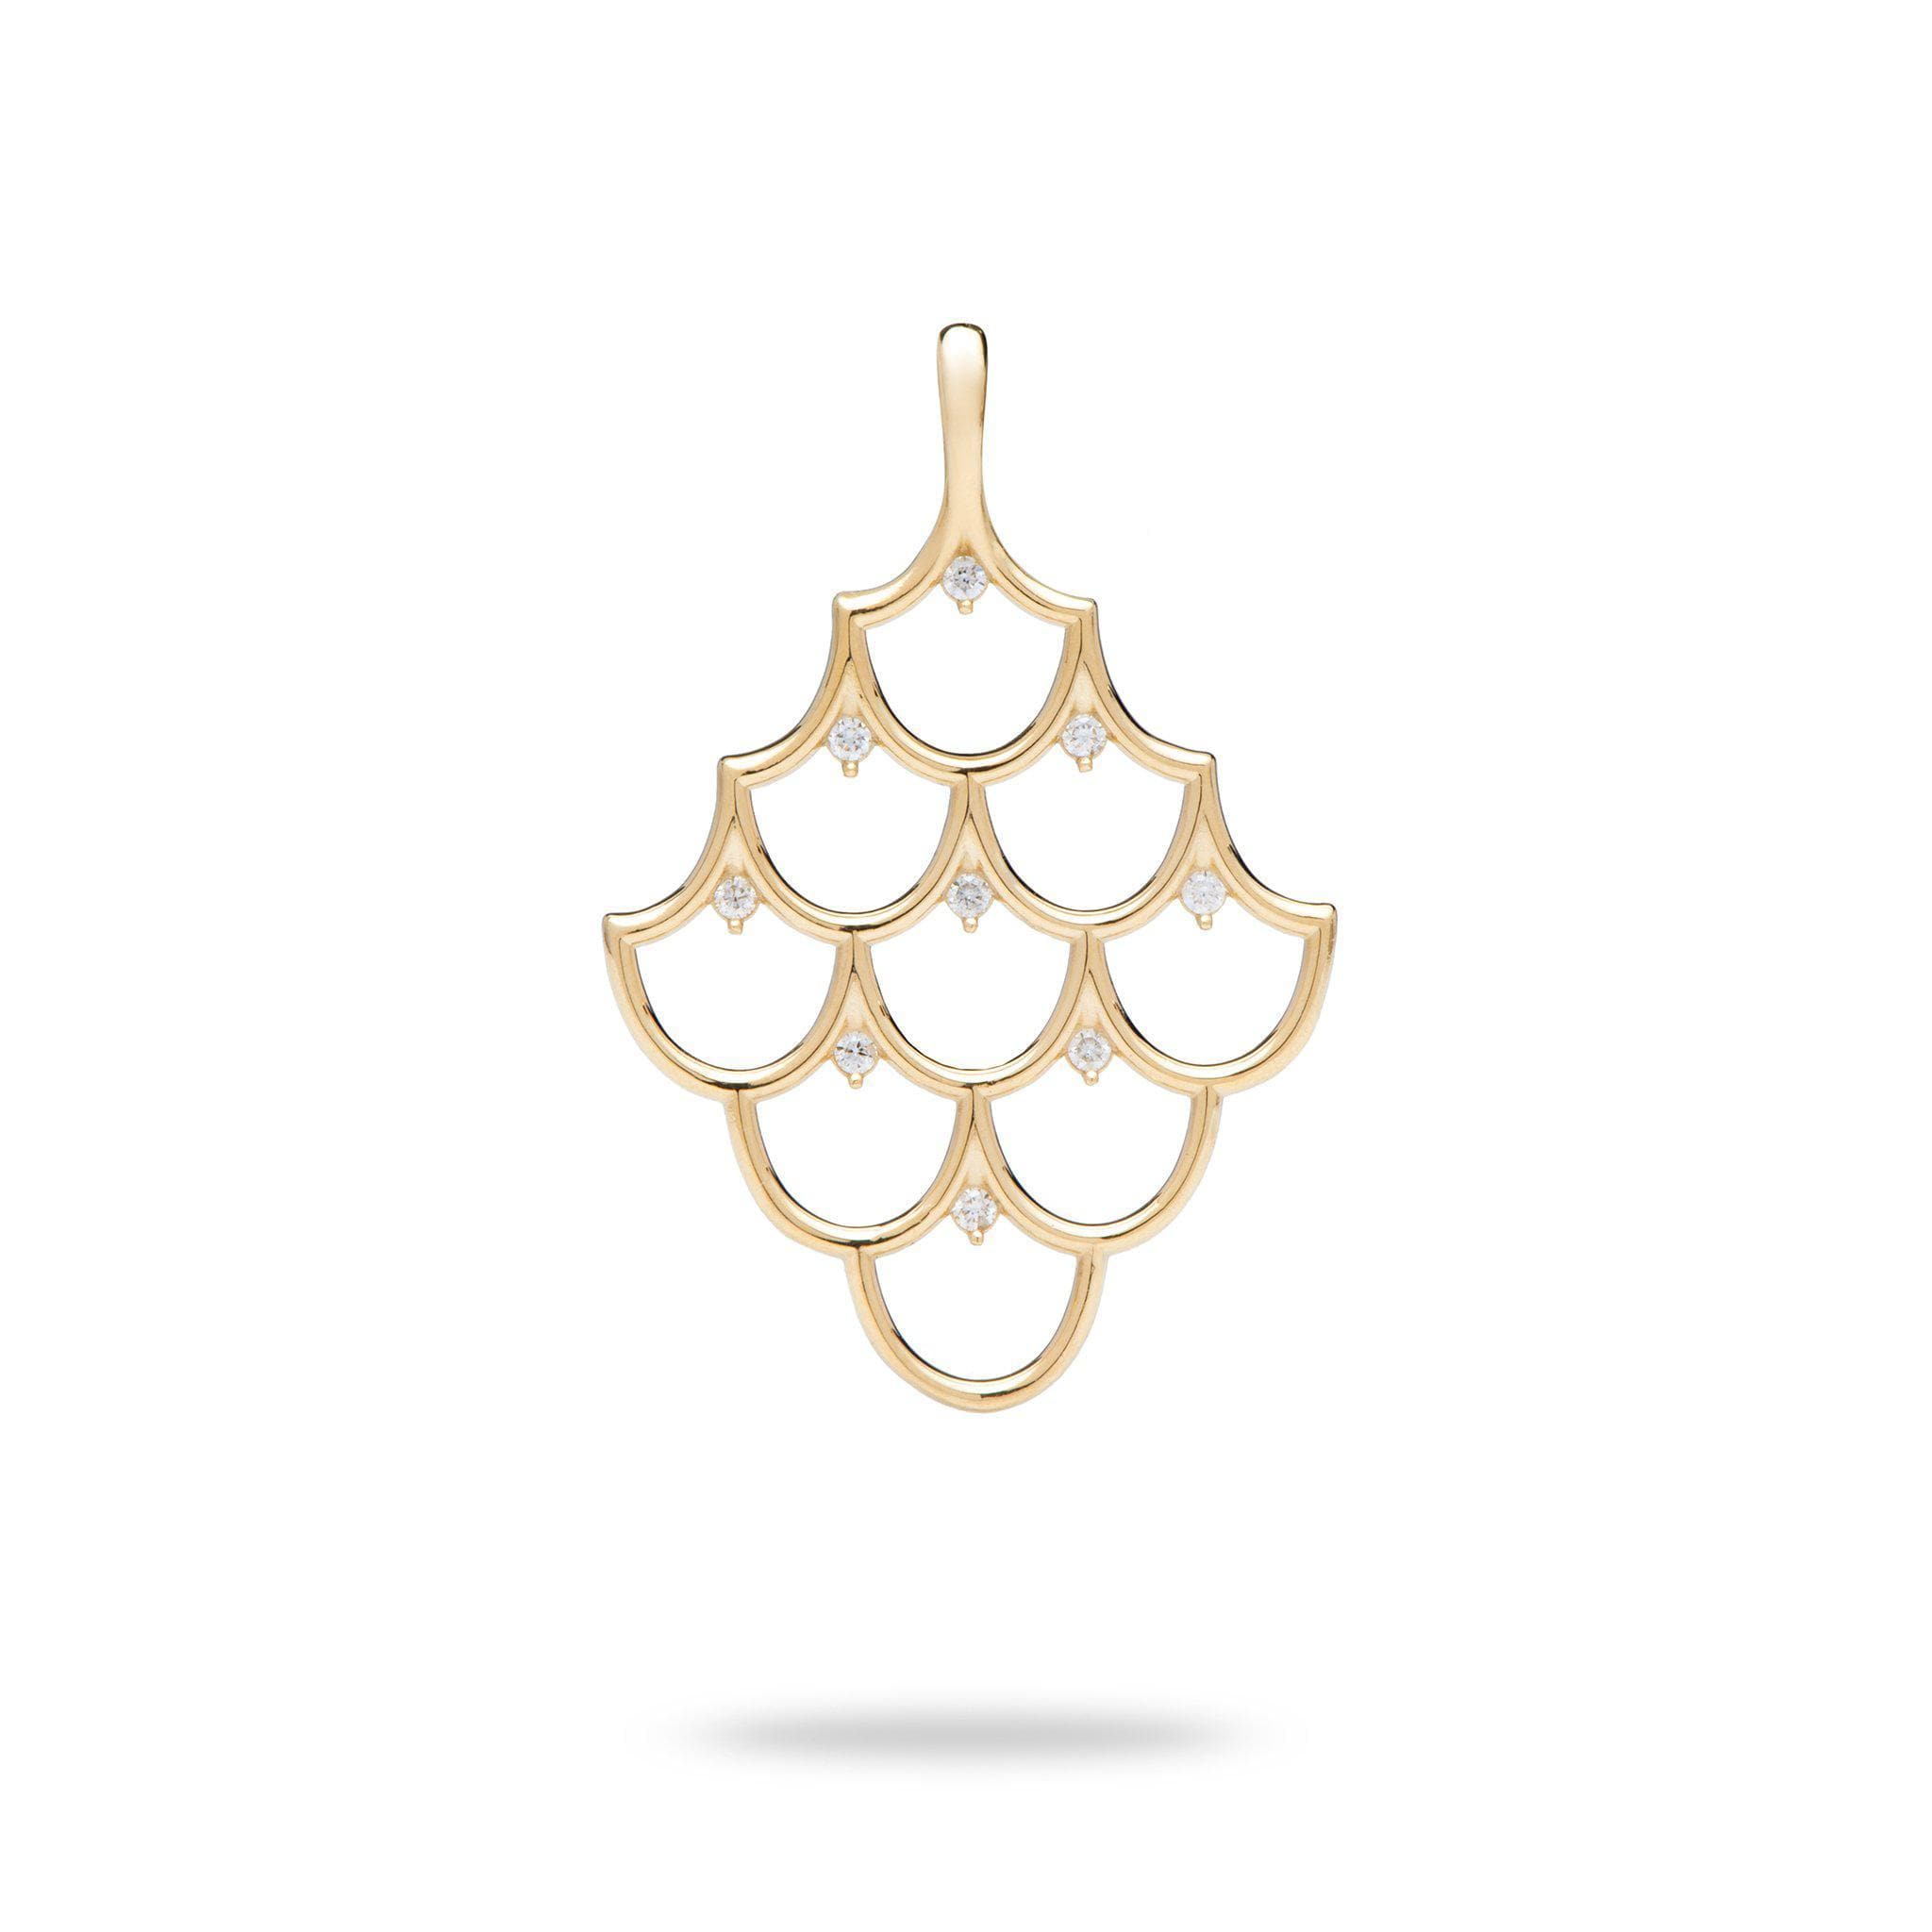 Mermaid Scales (35mm) Pendant in Gold with Diamonds-Maui Divers Jewelry